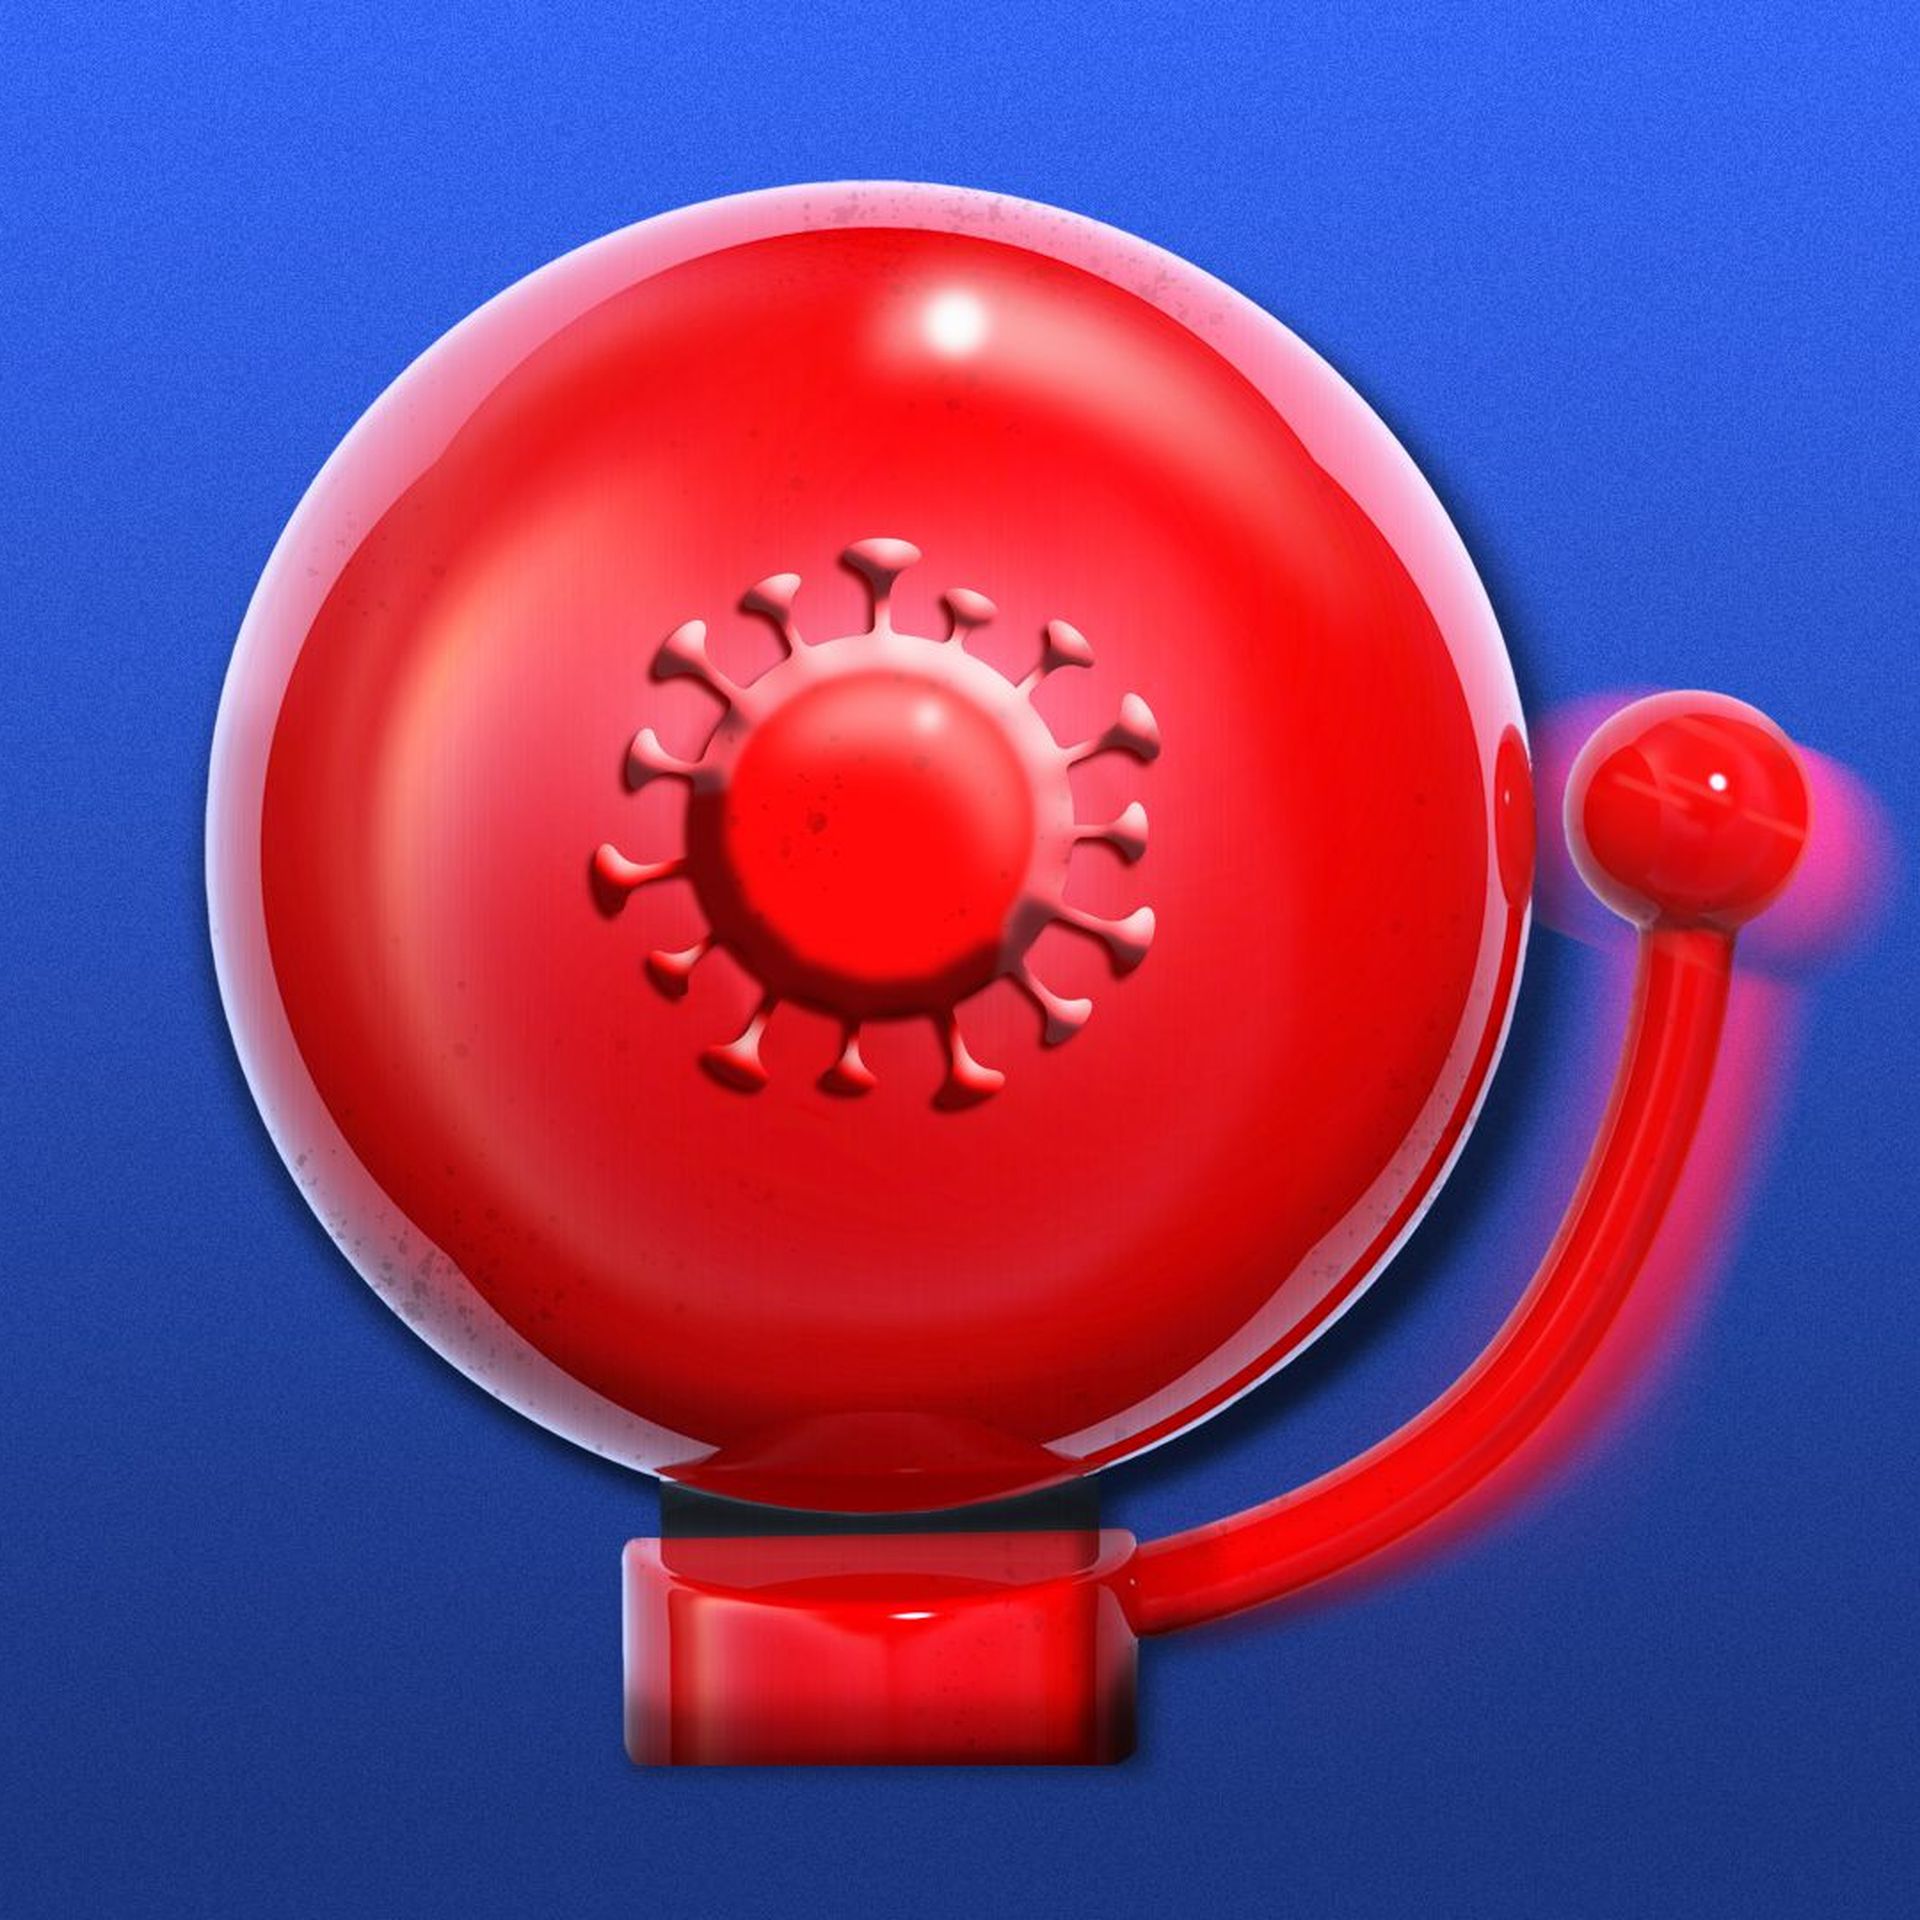 Illustration of a red alarm bell with a covid virus cell in the center